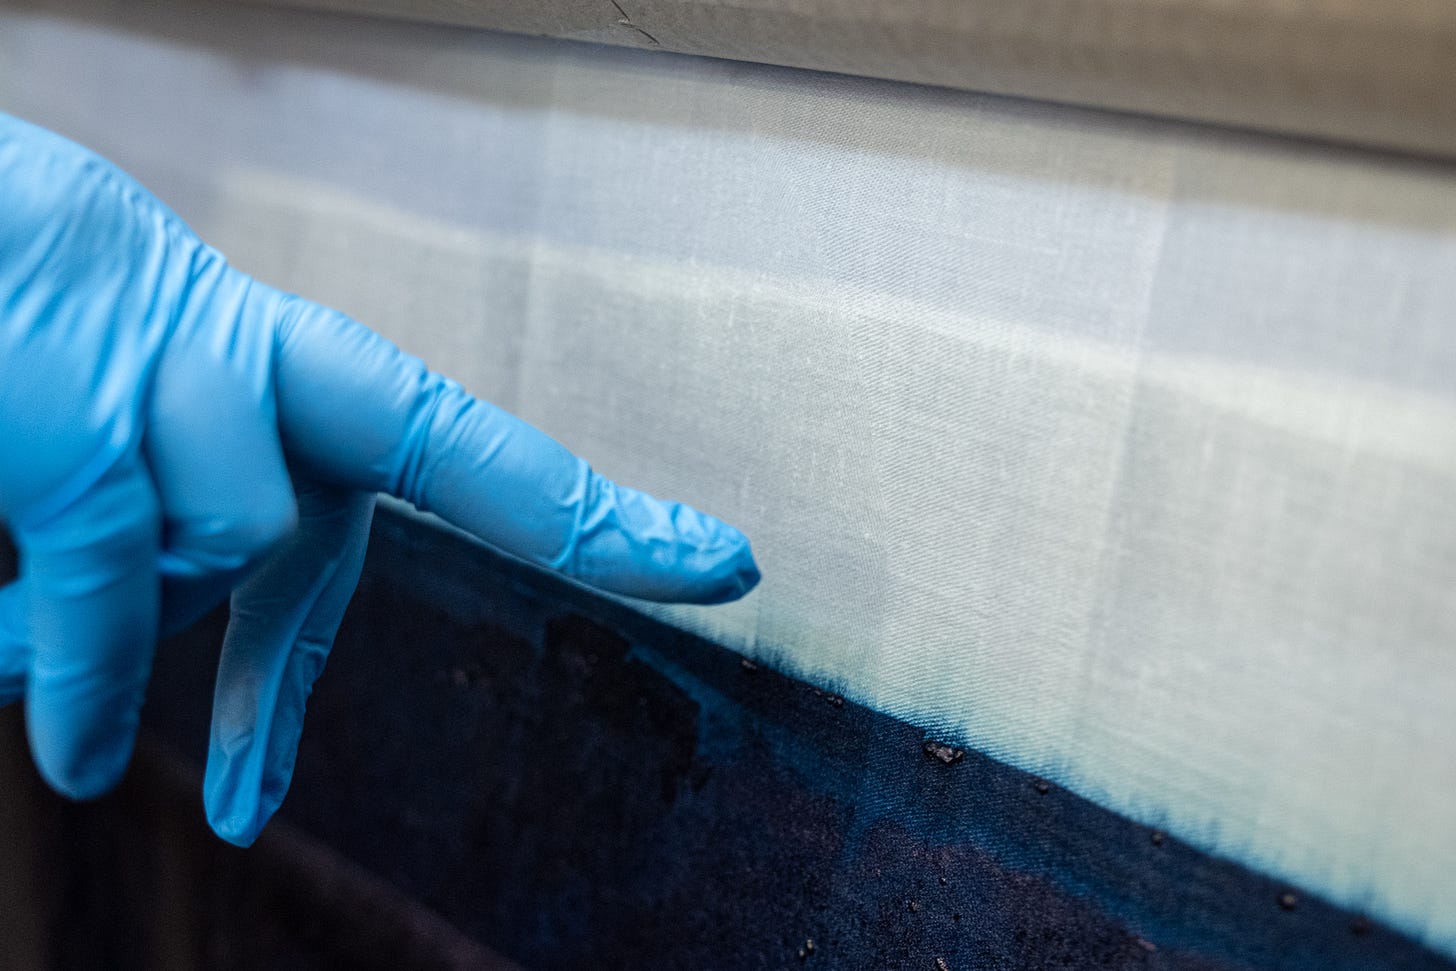 A blue gloved hand points to the edge of fresh indigo dye on a white cloth